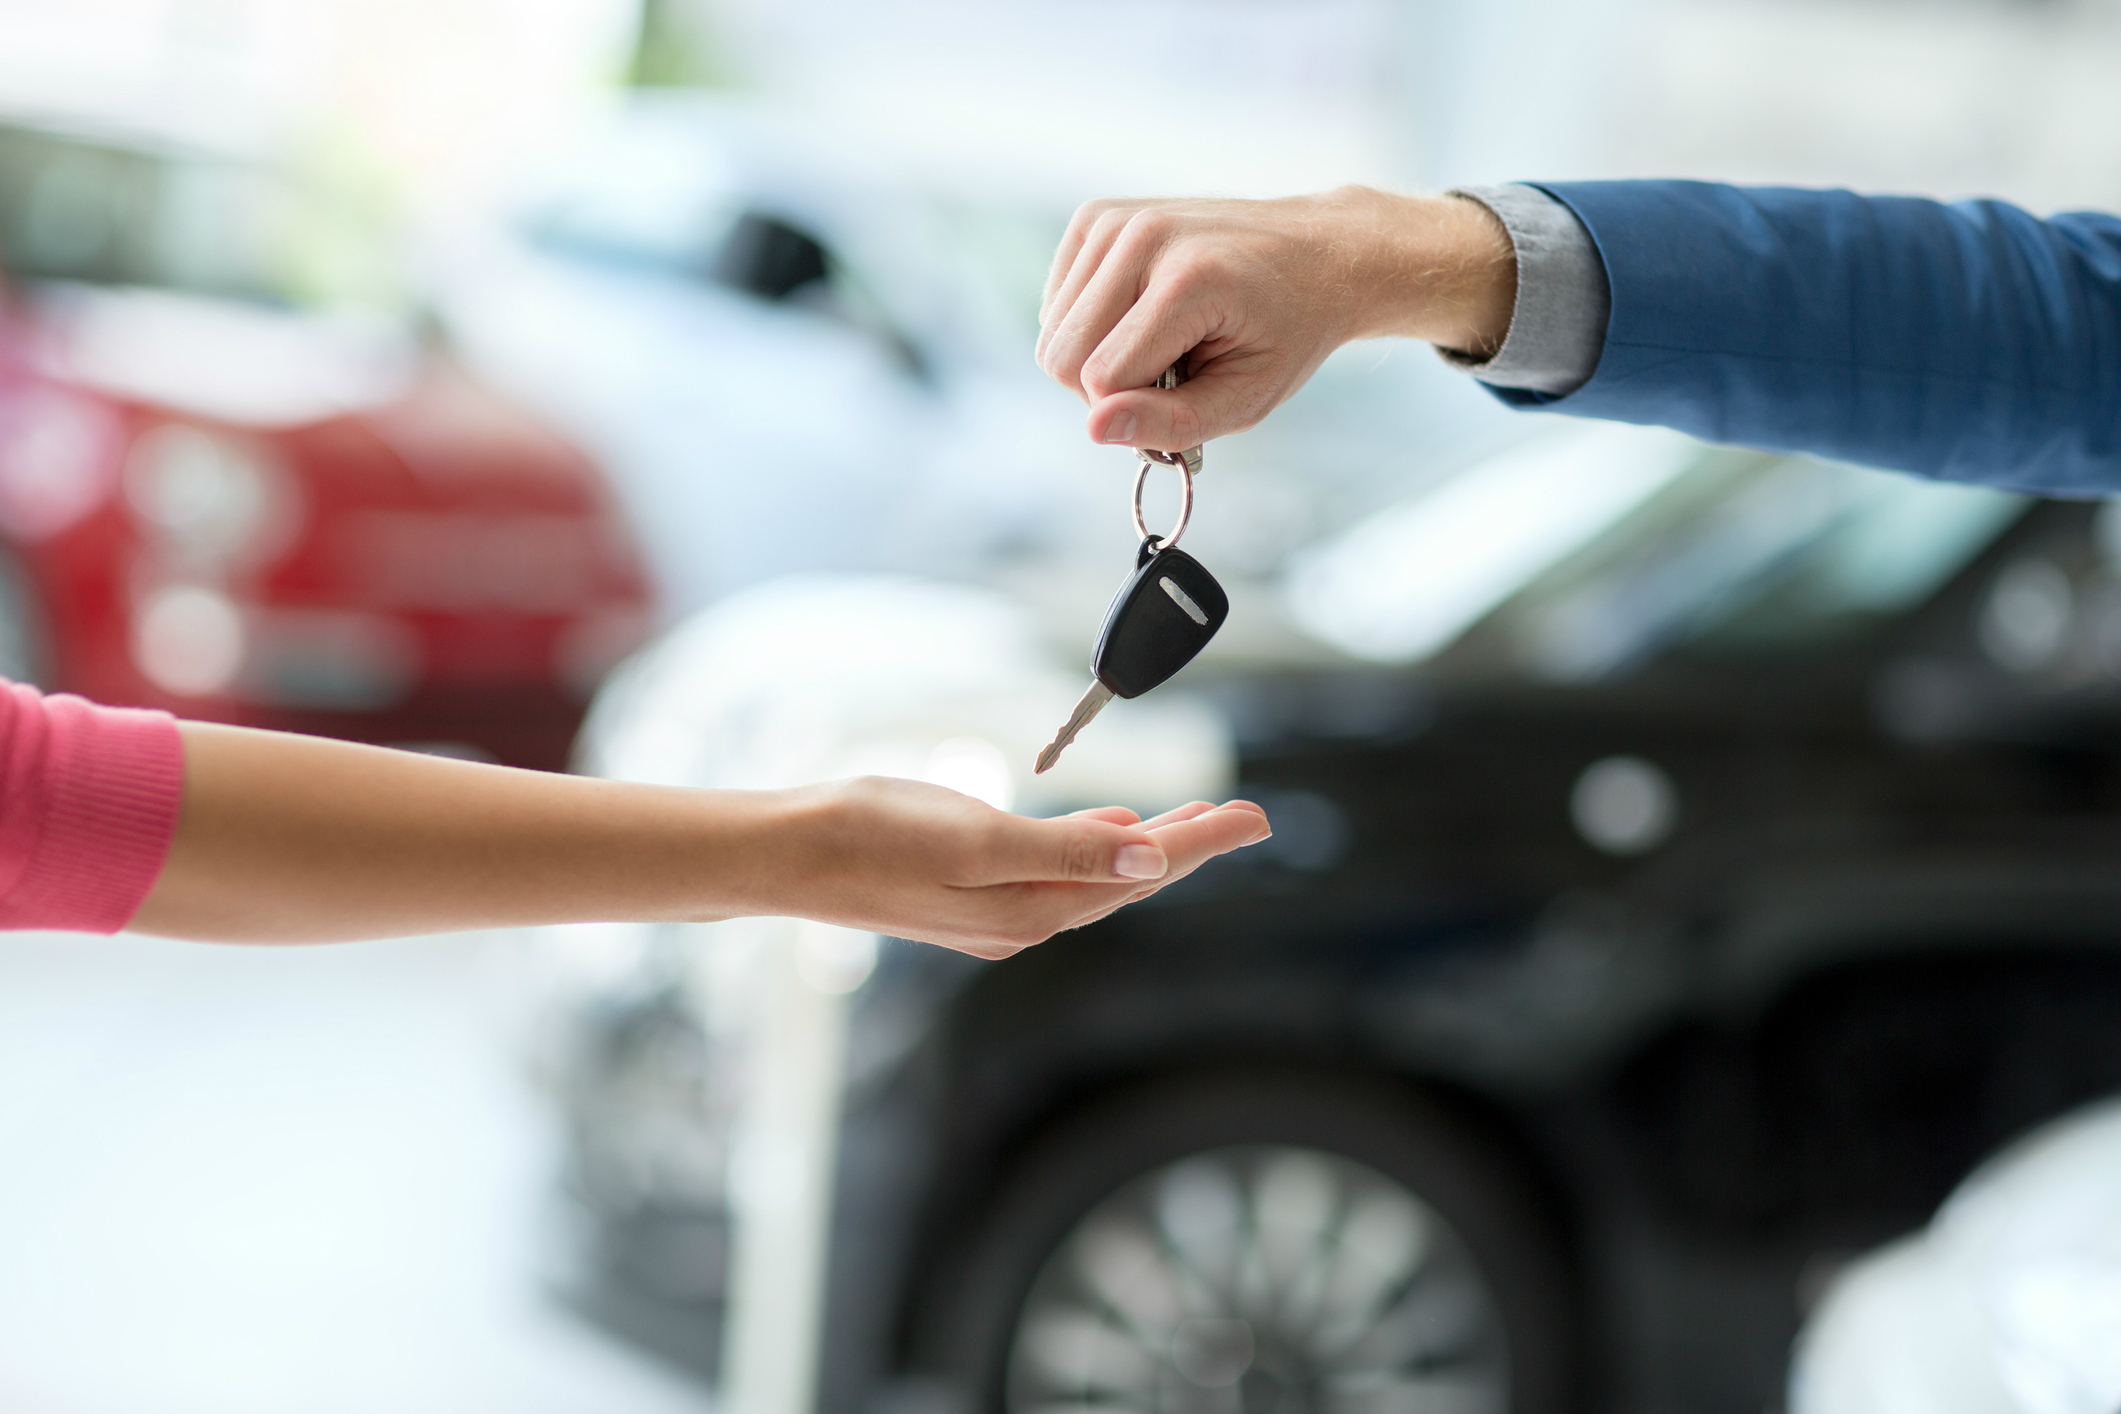 Beat the bogus buyers: how to safely sell a used car privately